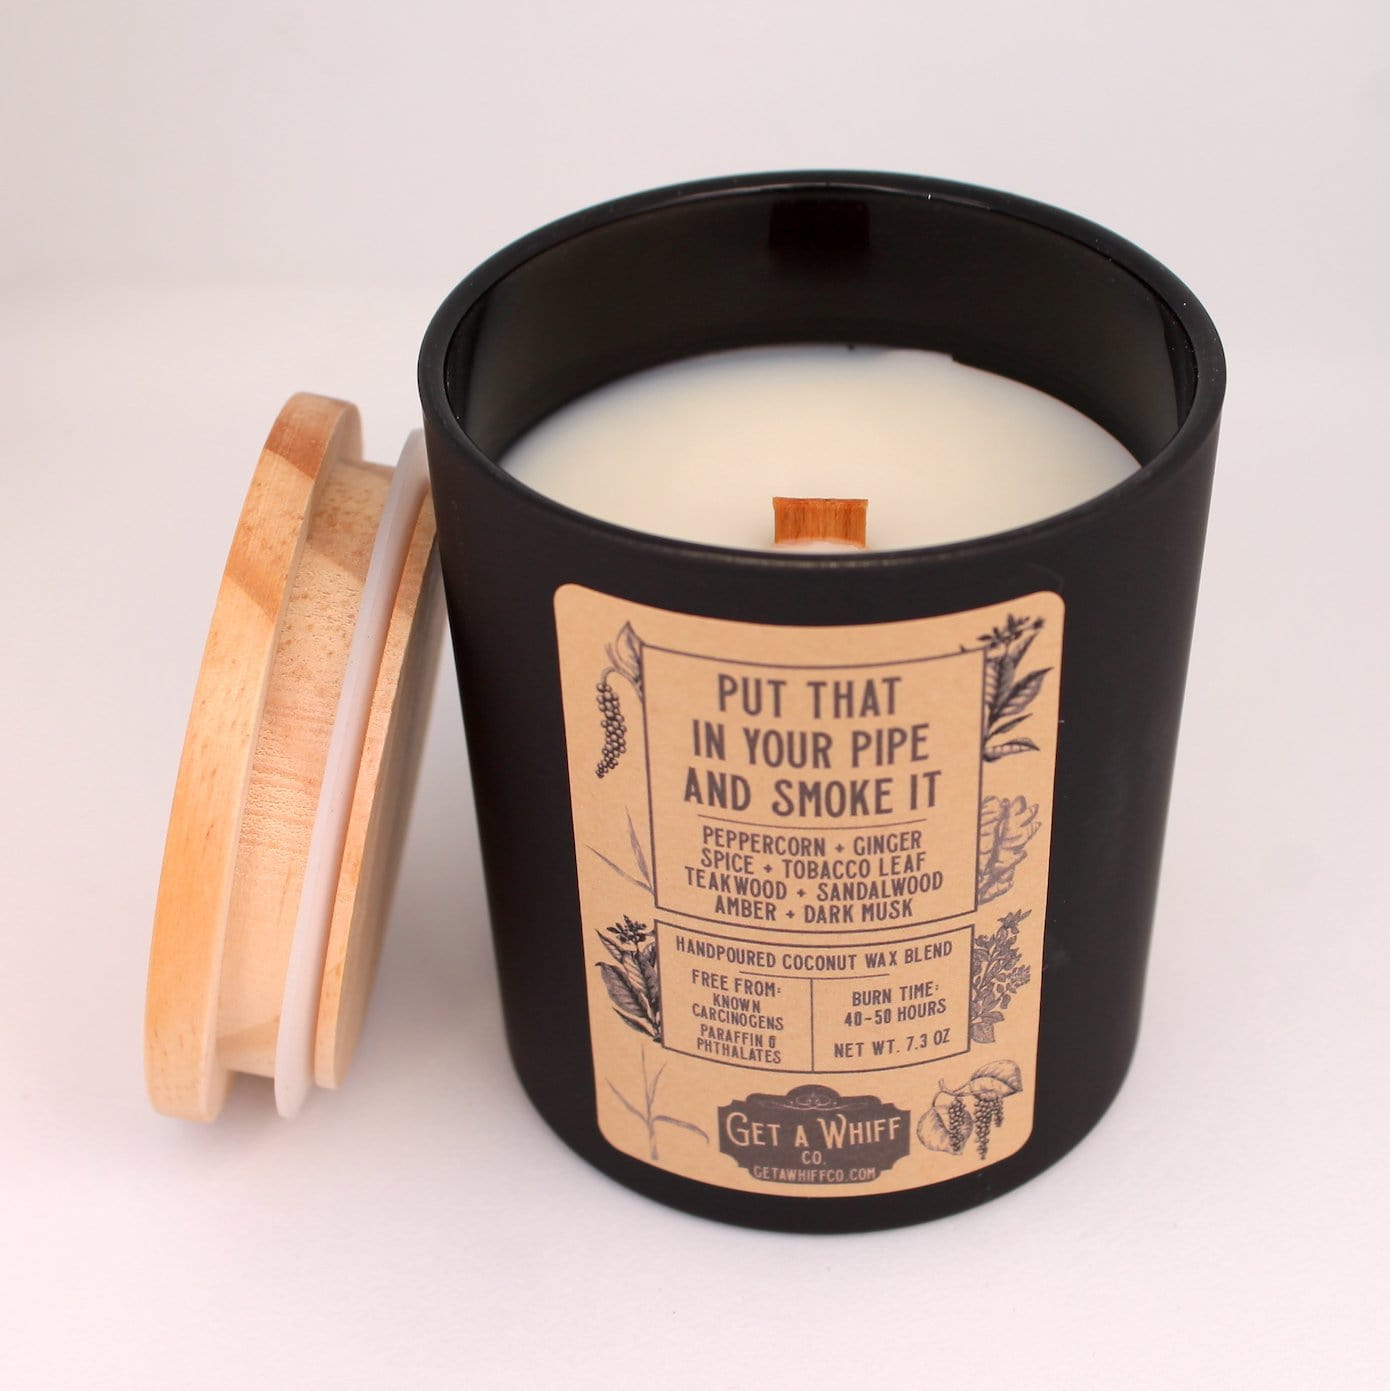 Tobacco & Teakwood Crackling Wooden Wick Scented Candle Made With Coconut Wax (Put That In Your Pipe And Smoke It)